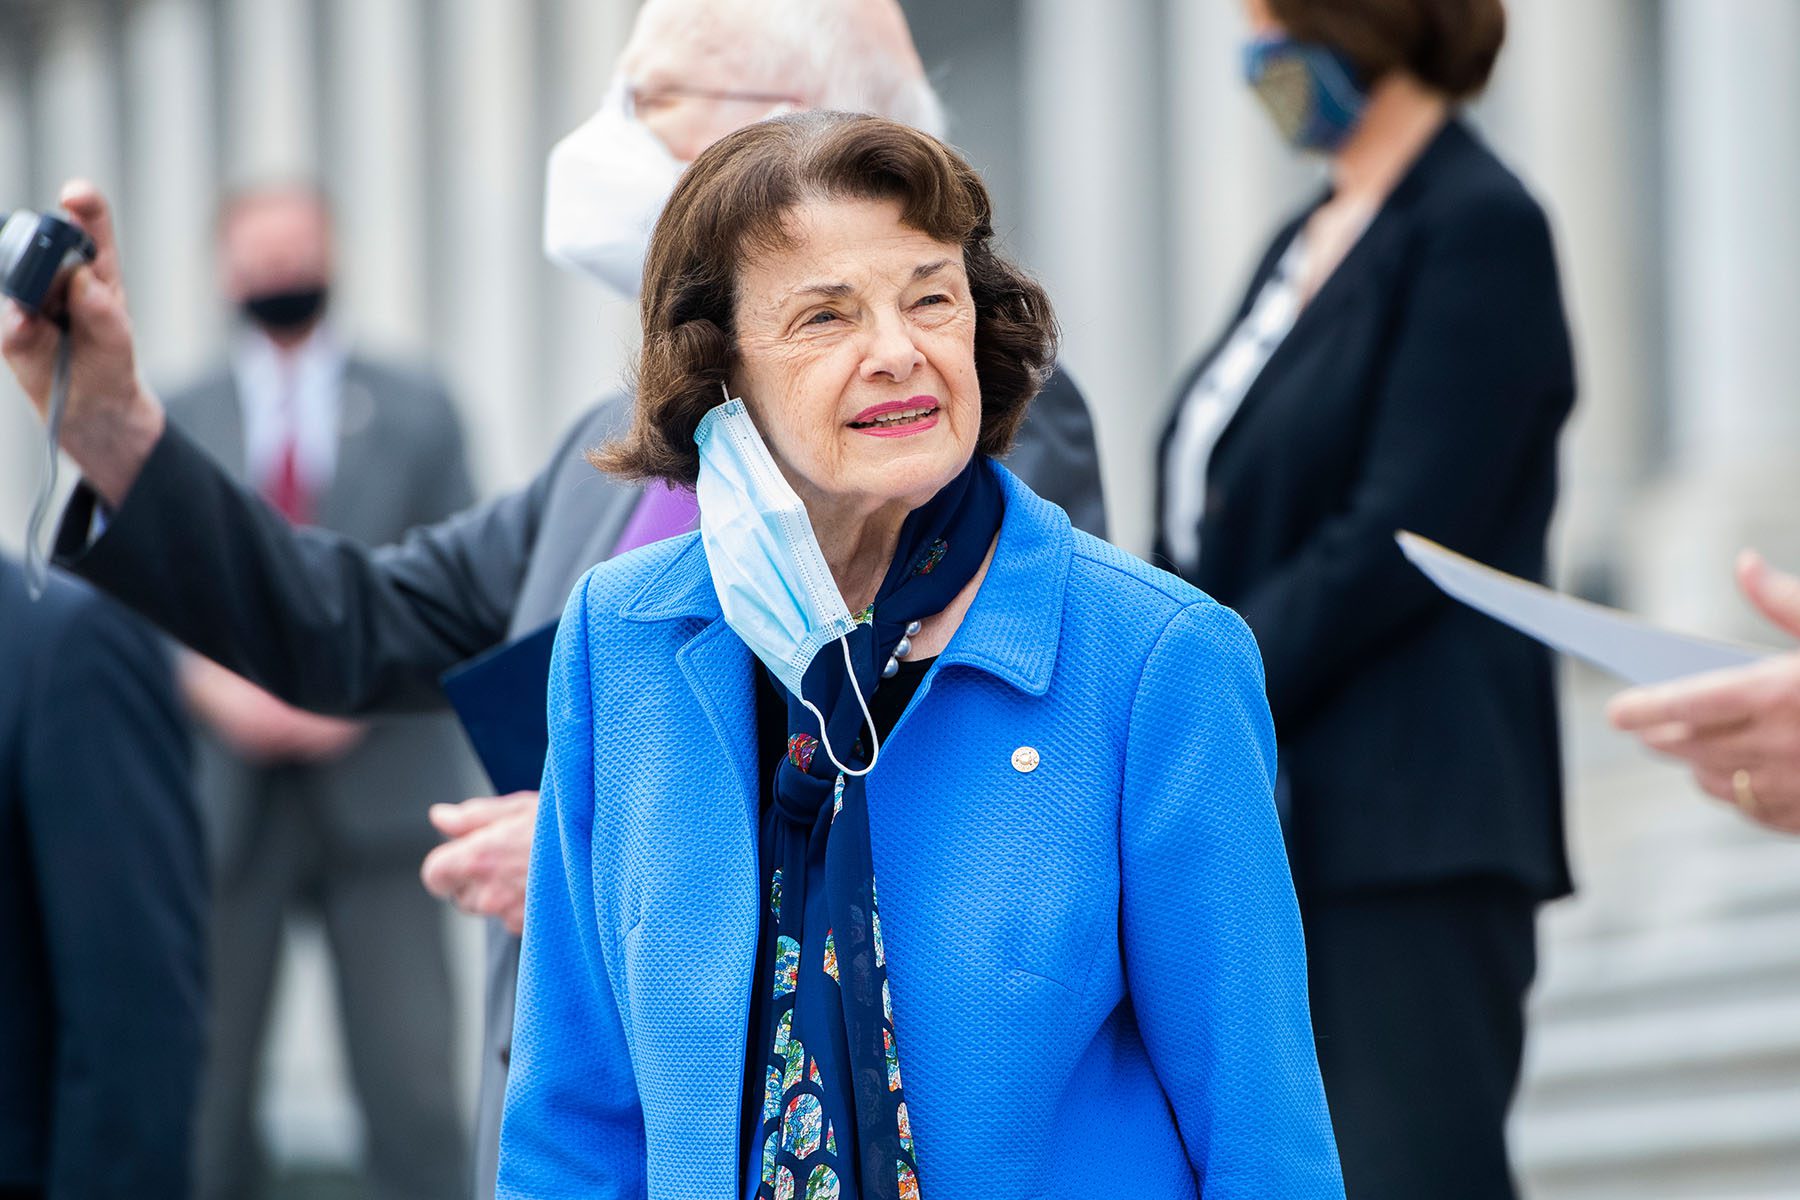 Dianne Feinstein looks into the distance from the steps of the Capitol as her face mask hangs from her ear.